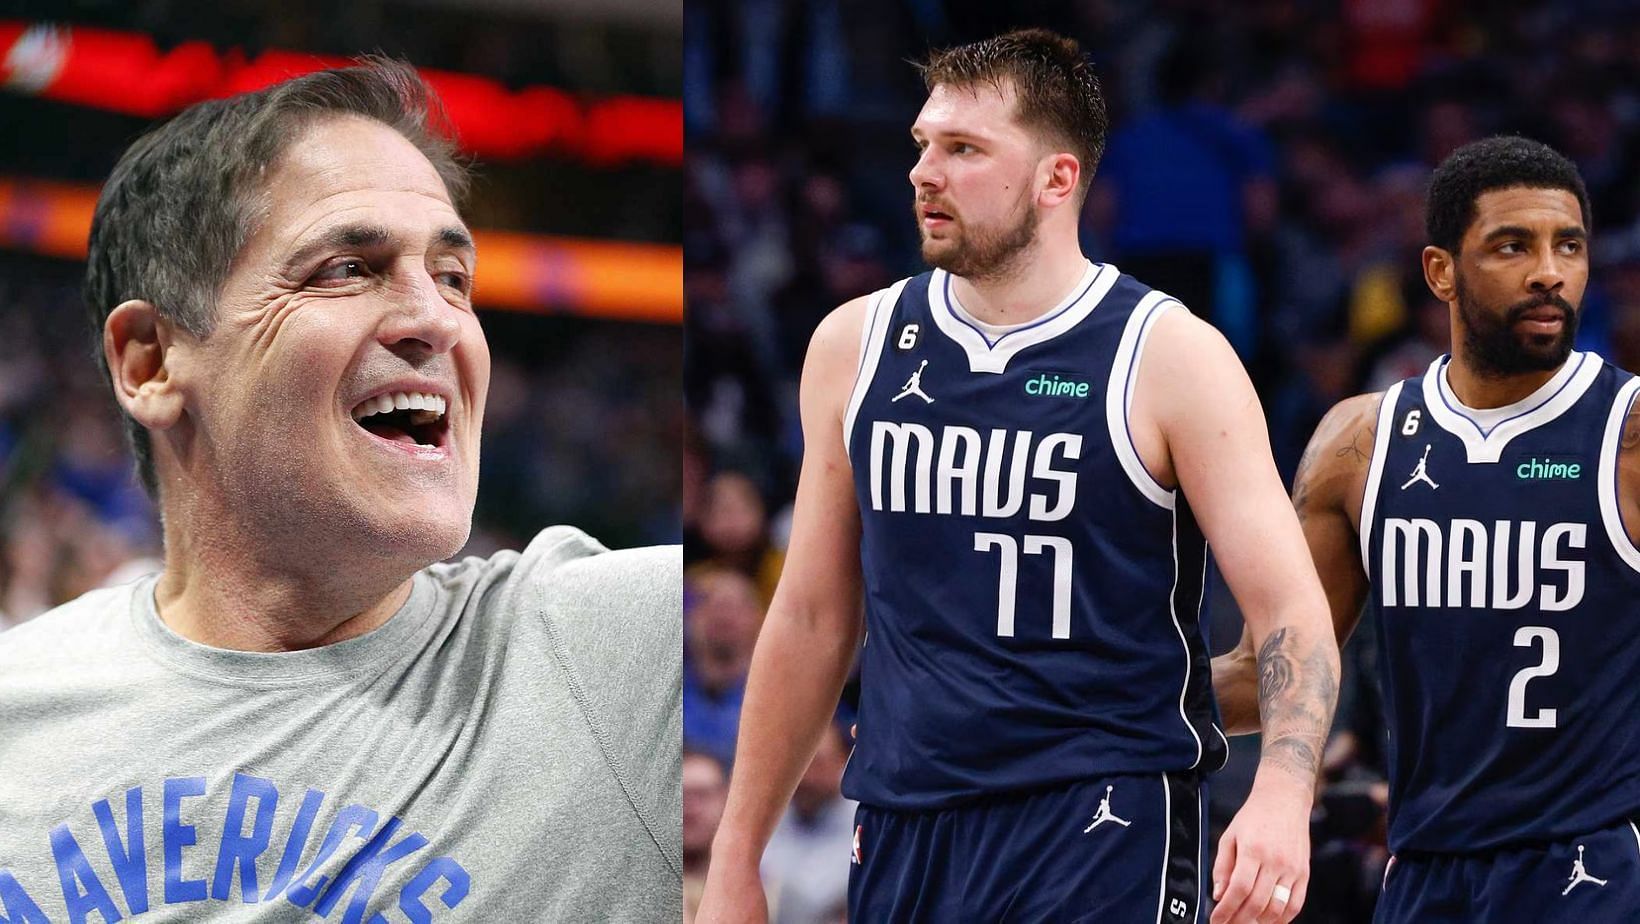 Even with the re-signing of Kyrie Irving, Mark Cuban is making it known that the Dallas Mavericks is Luka Doncic